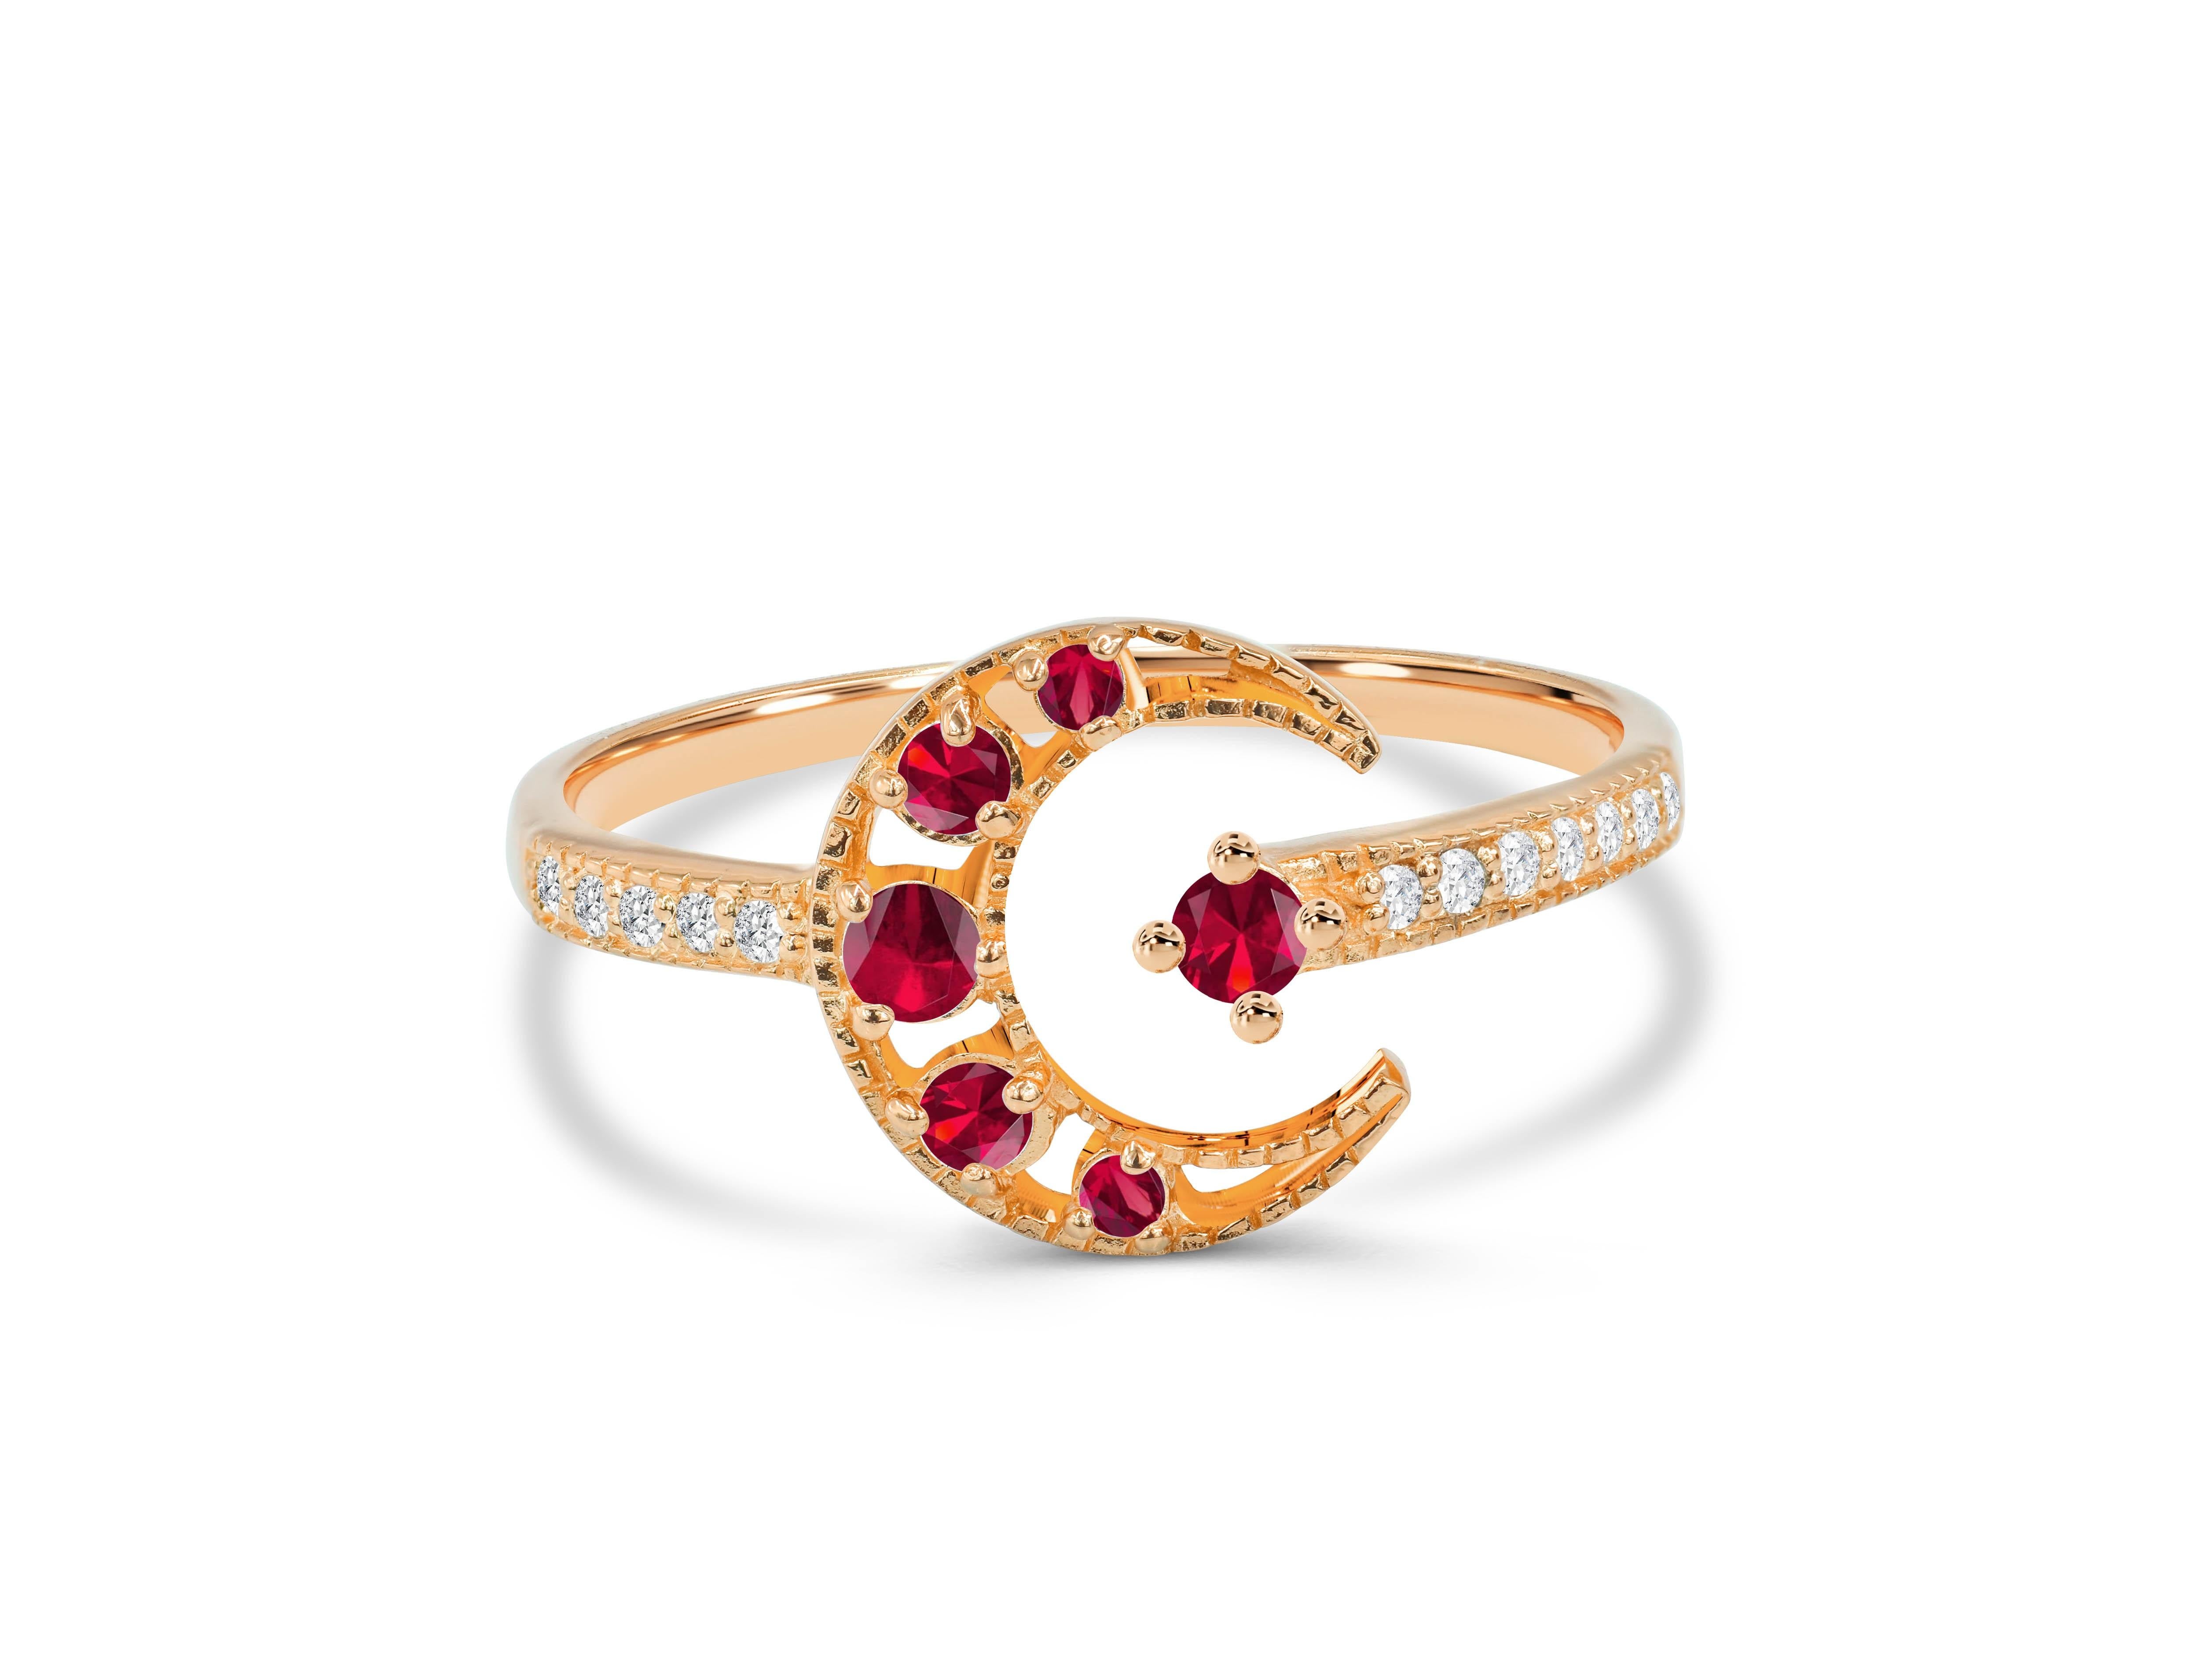 For Sale:  0.31 Ct Emerald, Ruby and Sapphire Crescent Moon Diamond Ring in 14K Gold 2